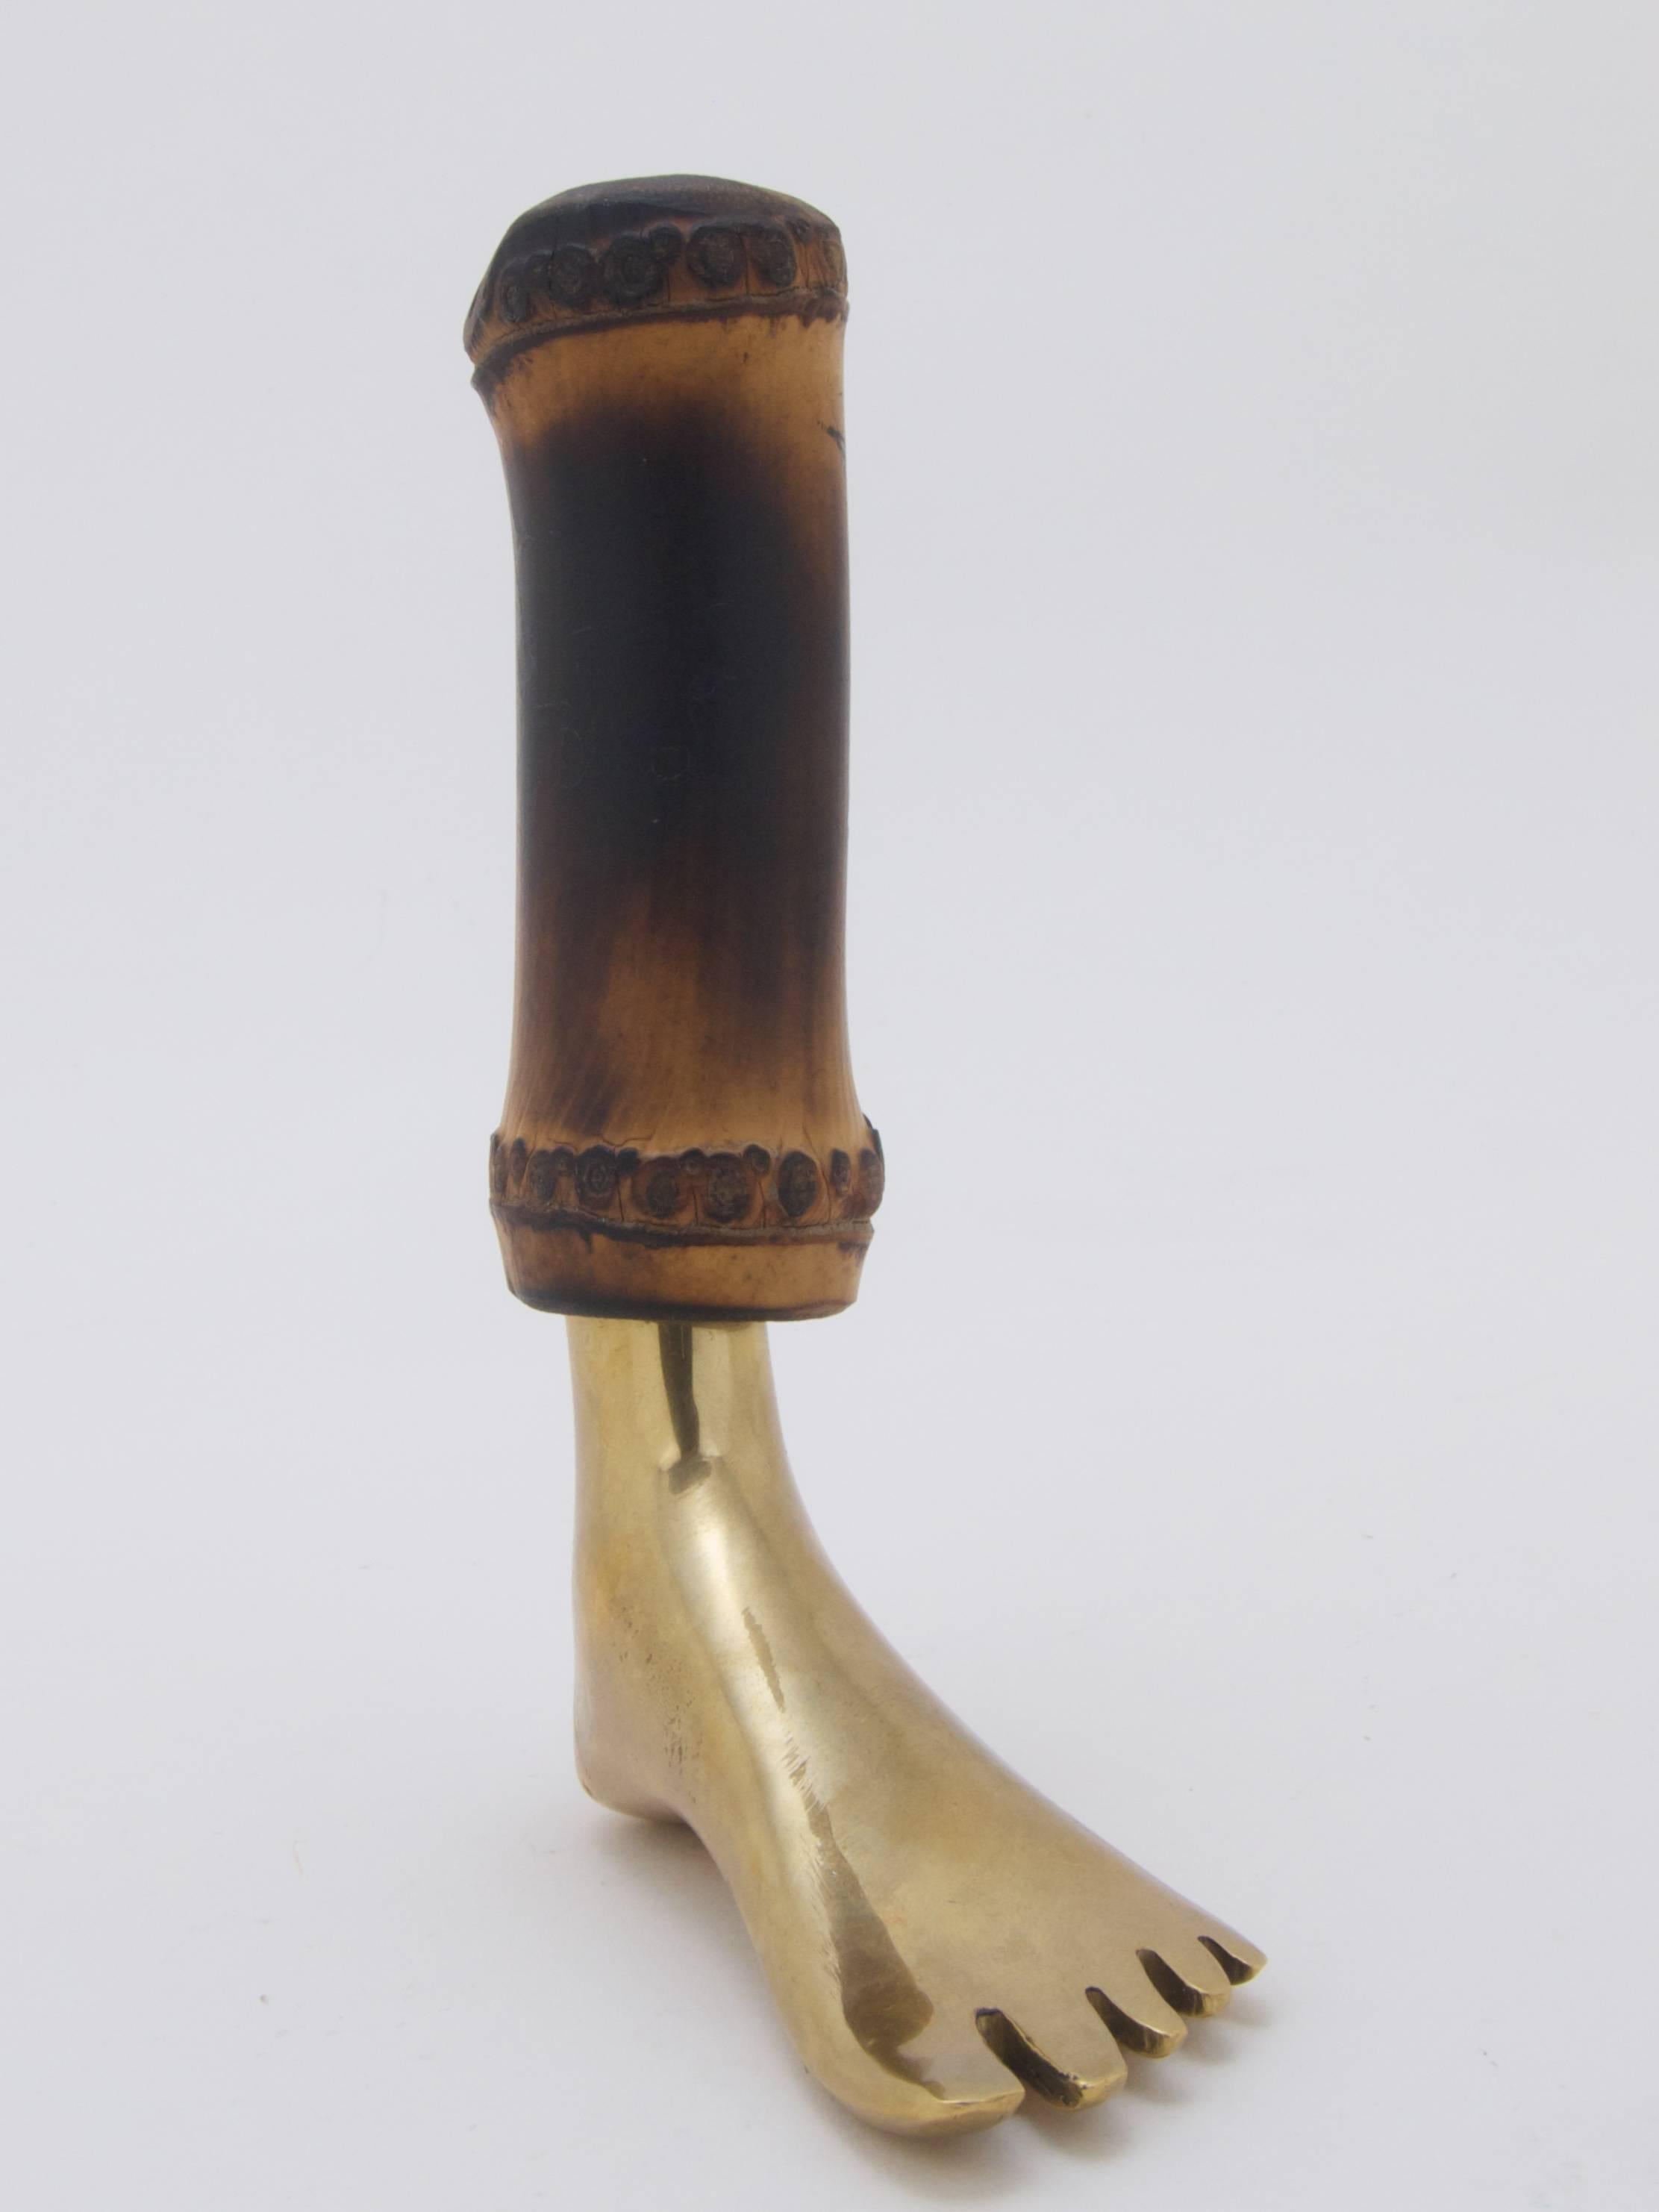 Corkscrew by Carl Auböck
brass foot with a bamboo part to cover the steel spindle
marked with the Auböck logo.